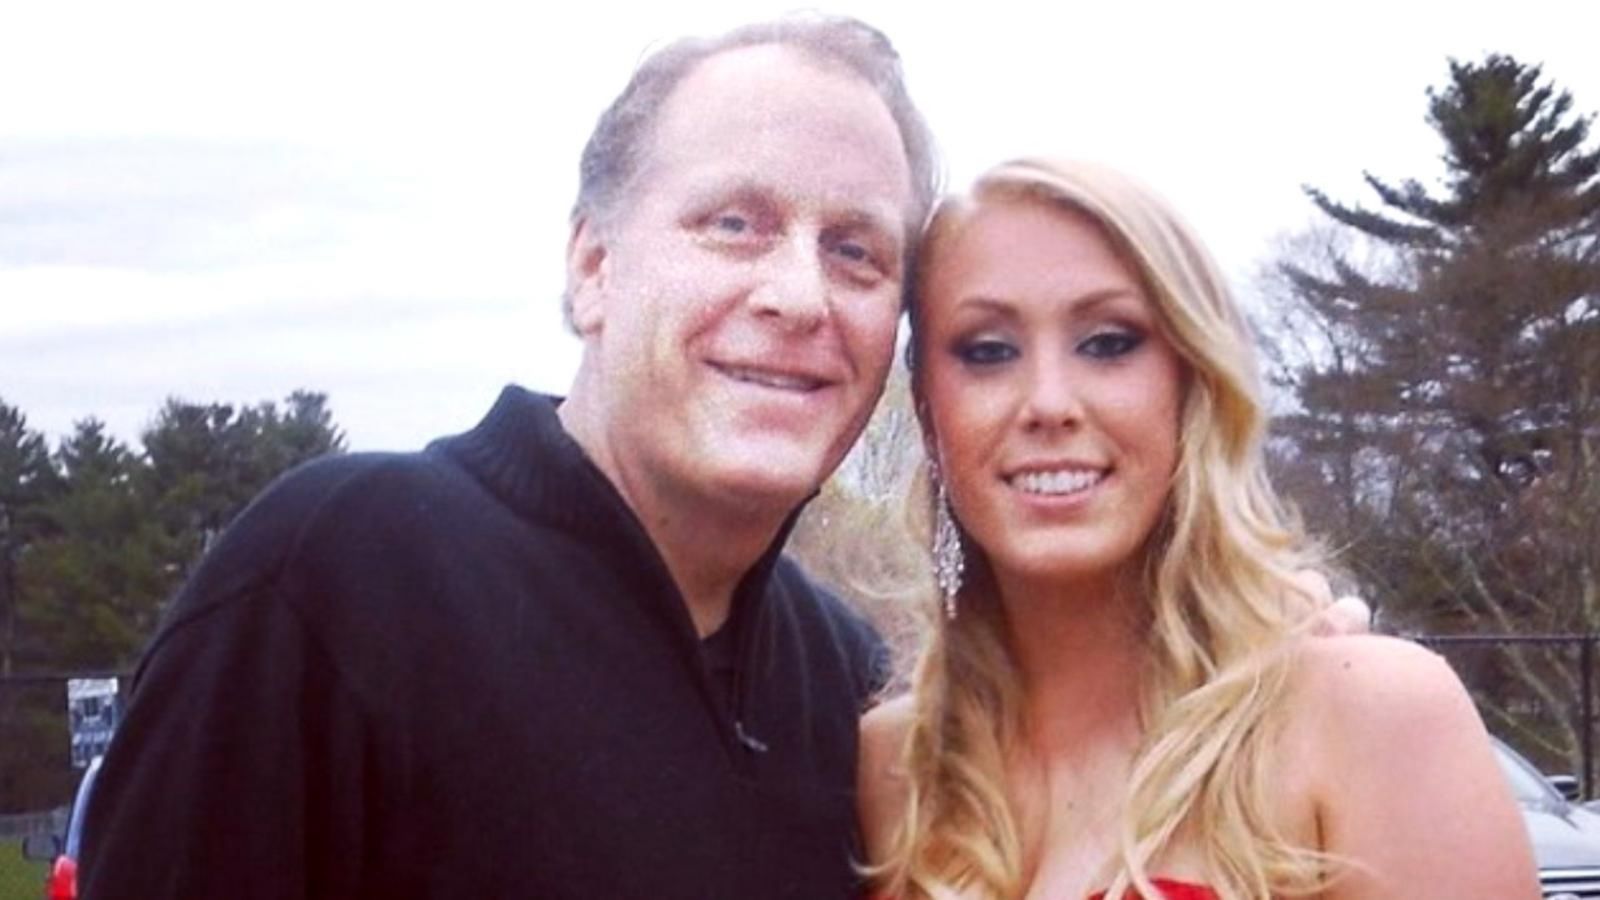 Curt Schilling goes after daughter's cyber-bullies 